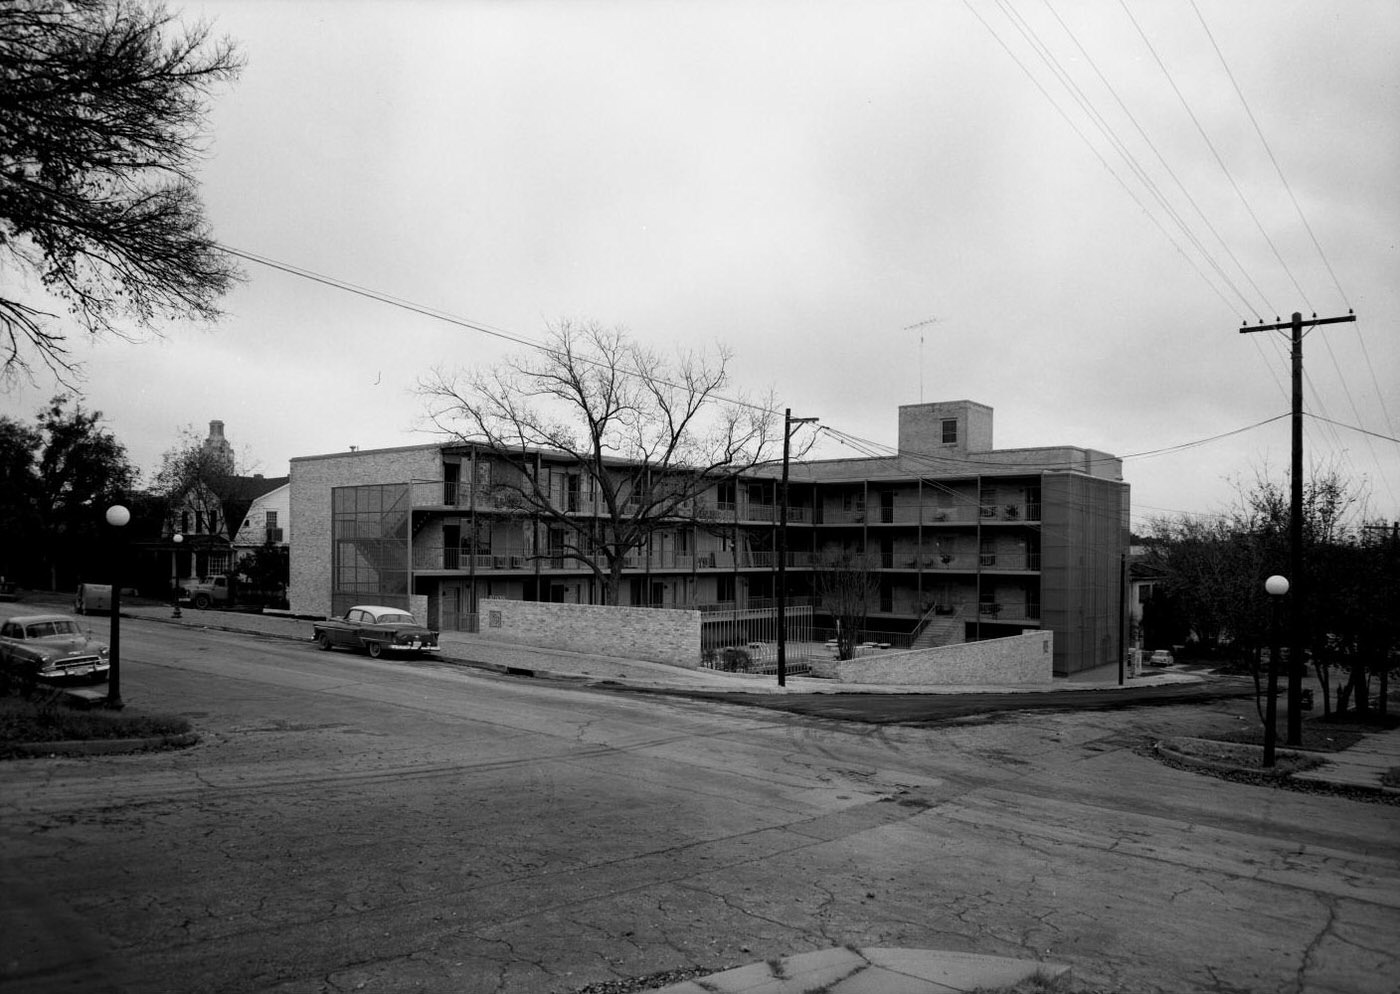 Rio House Apartments, View From Southwest Corner With University Tower in Background, 1959.